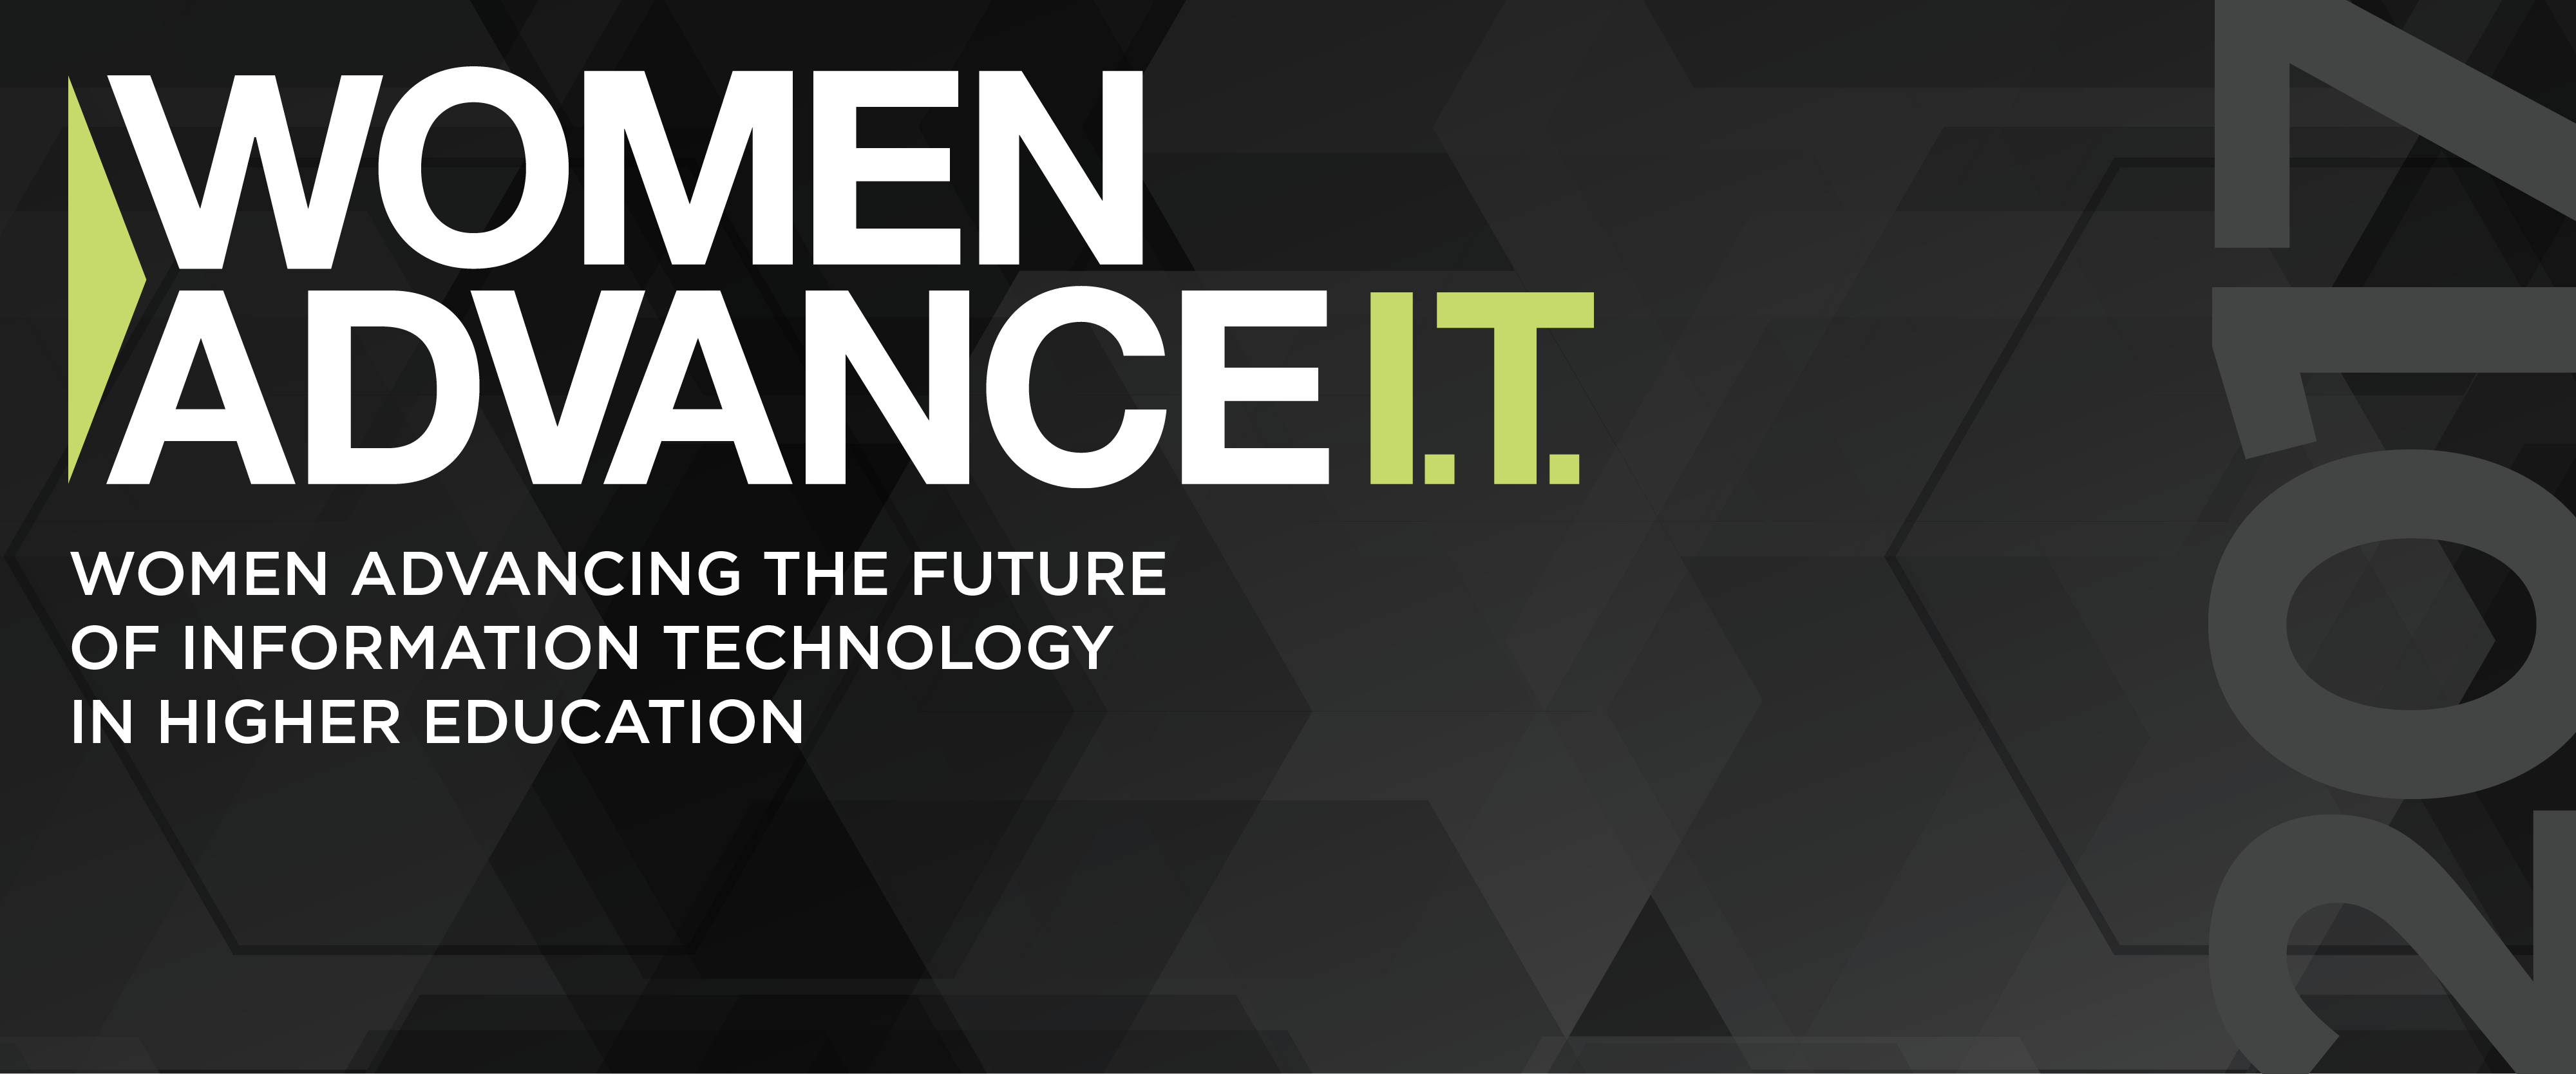 Women Advance I.T. leadership conference is Oct. 18-19.